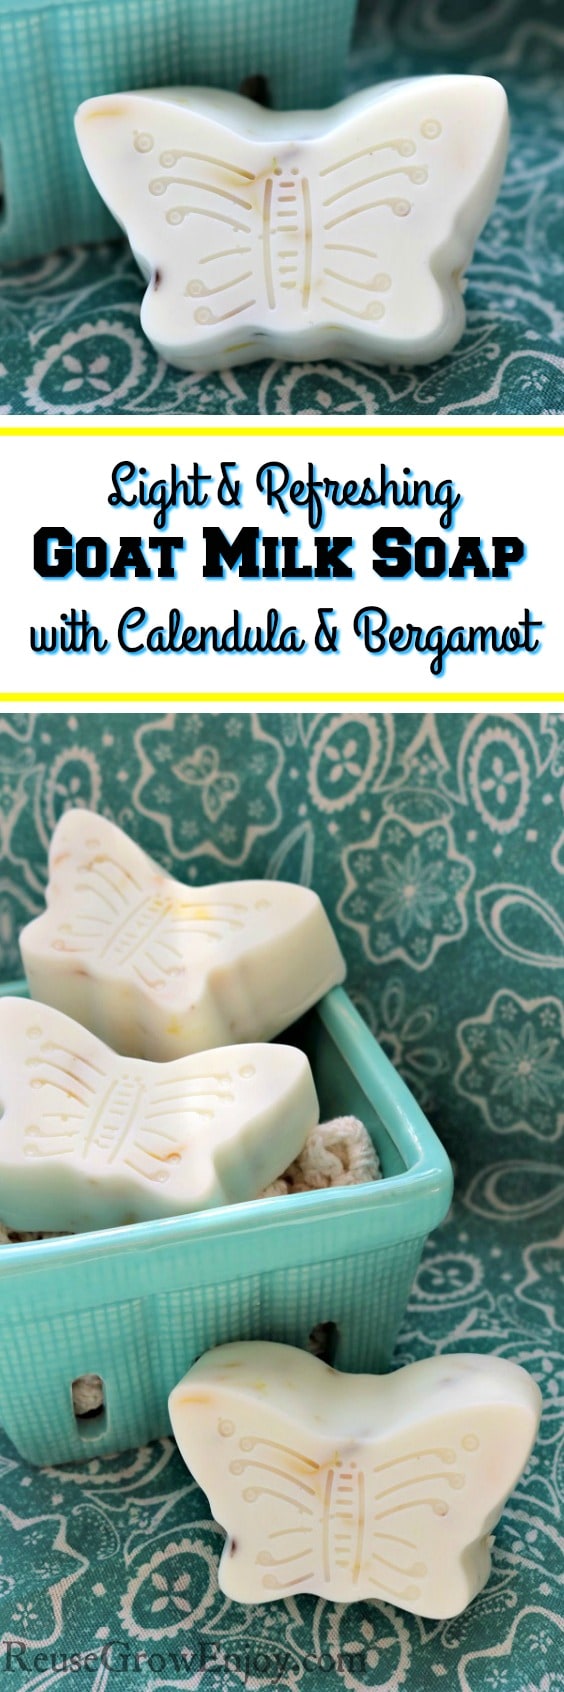 Who is ready to make some soap?? Check out this easy to make Springtime Light & Refreshing Goat Milk Soap with Calendula & Bergamot!